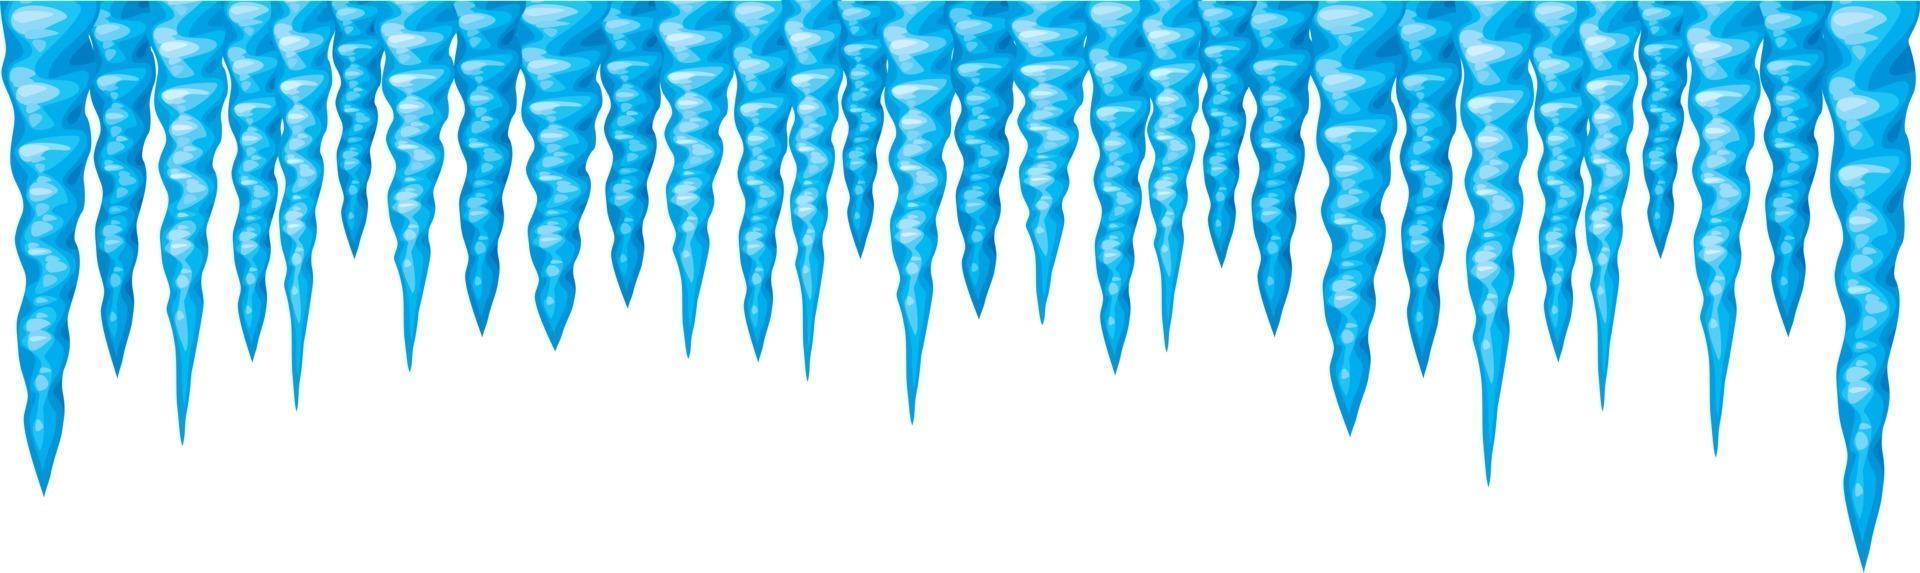 Shiny Icicle Background vector